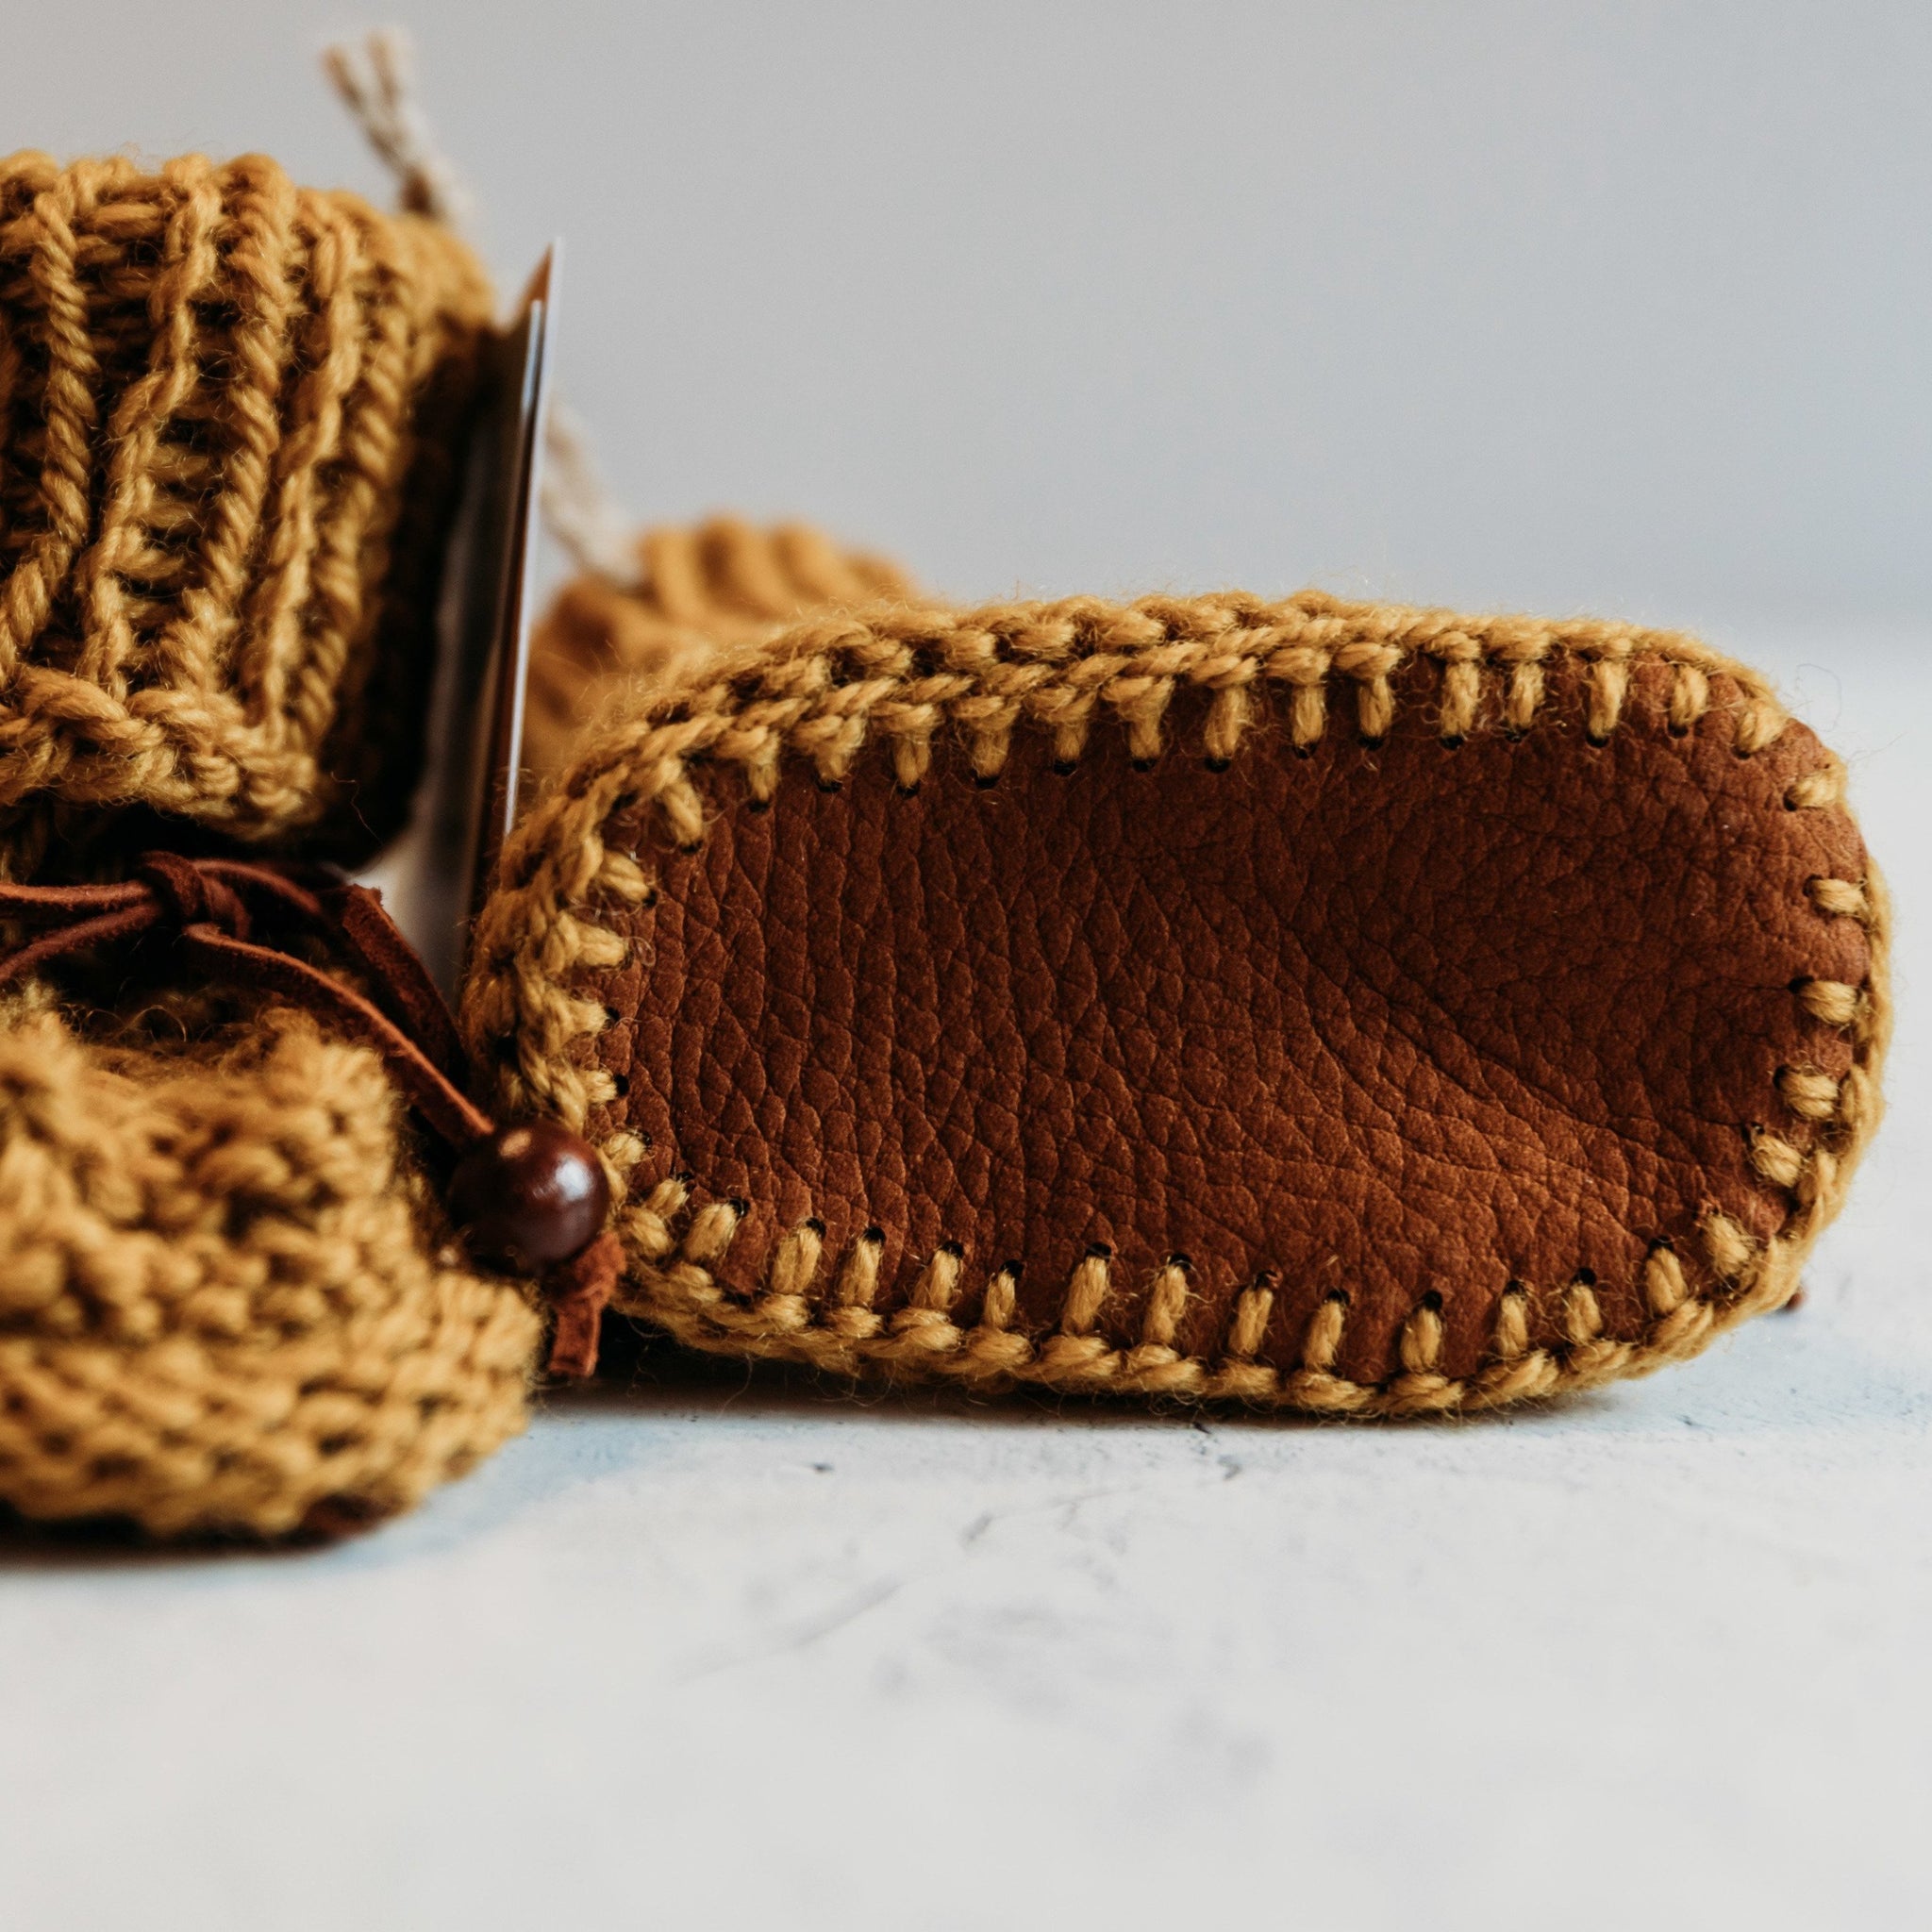 Lilia's Design Knit Baby Booties